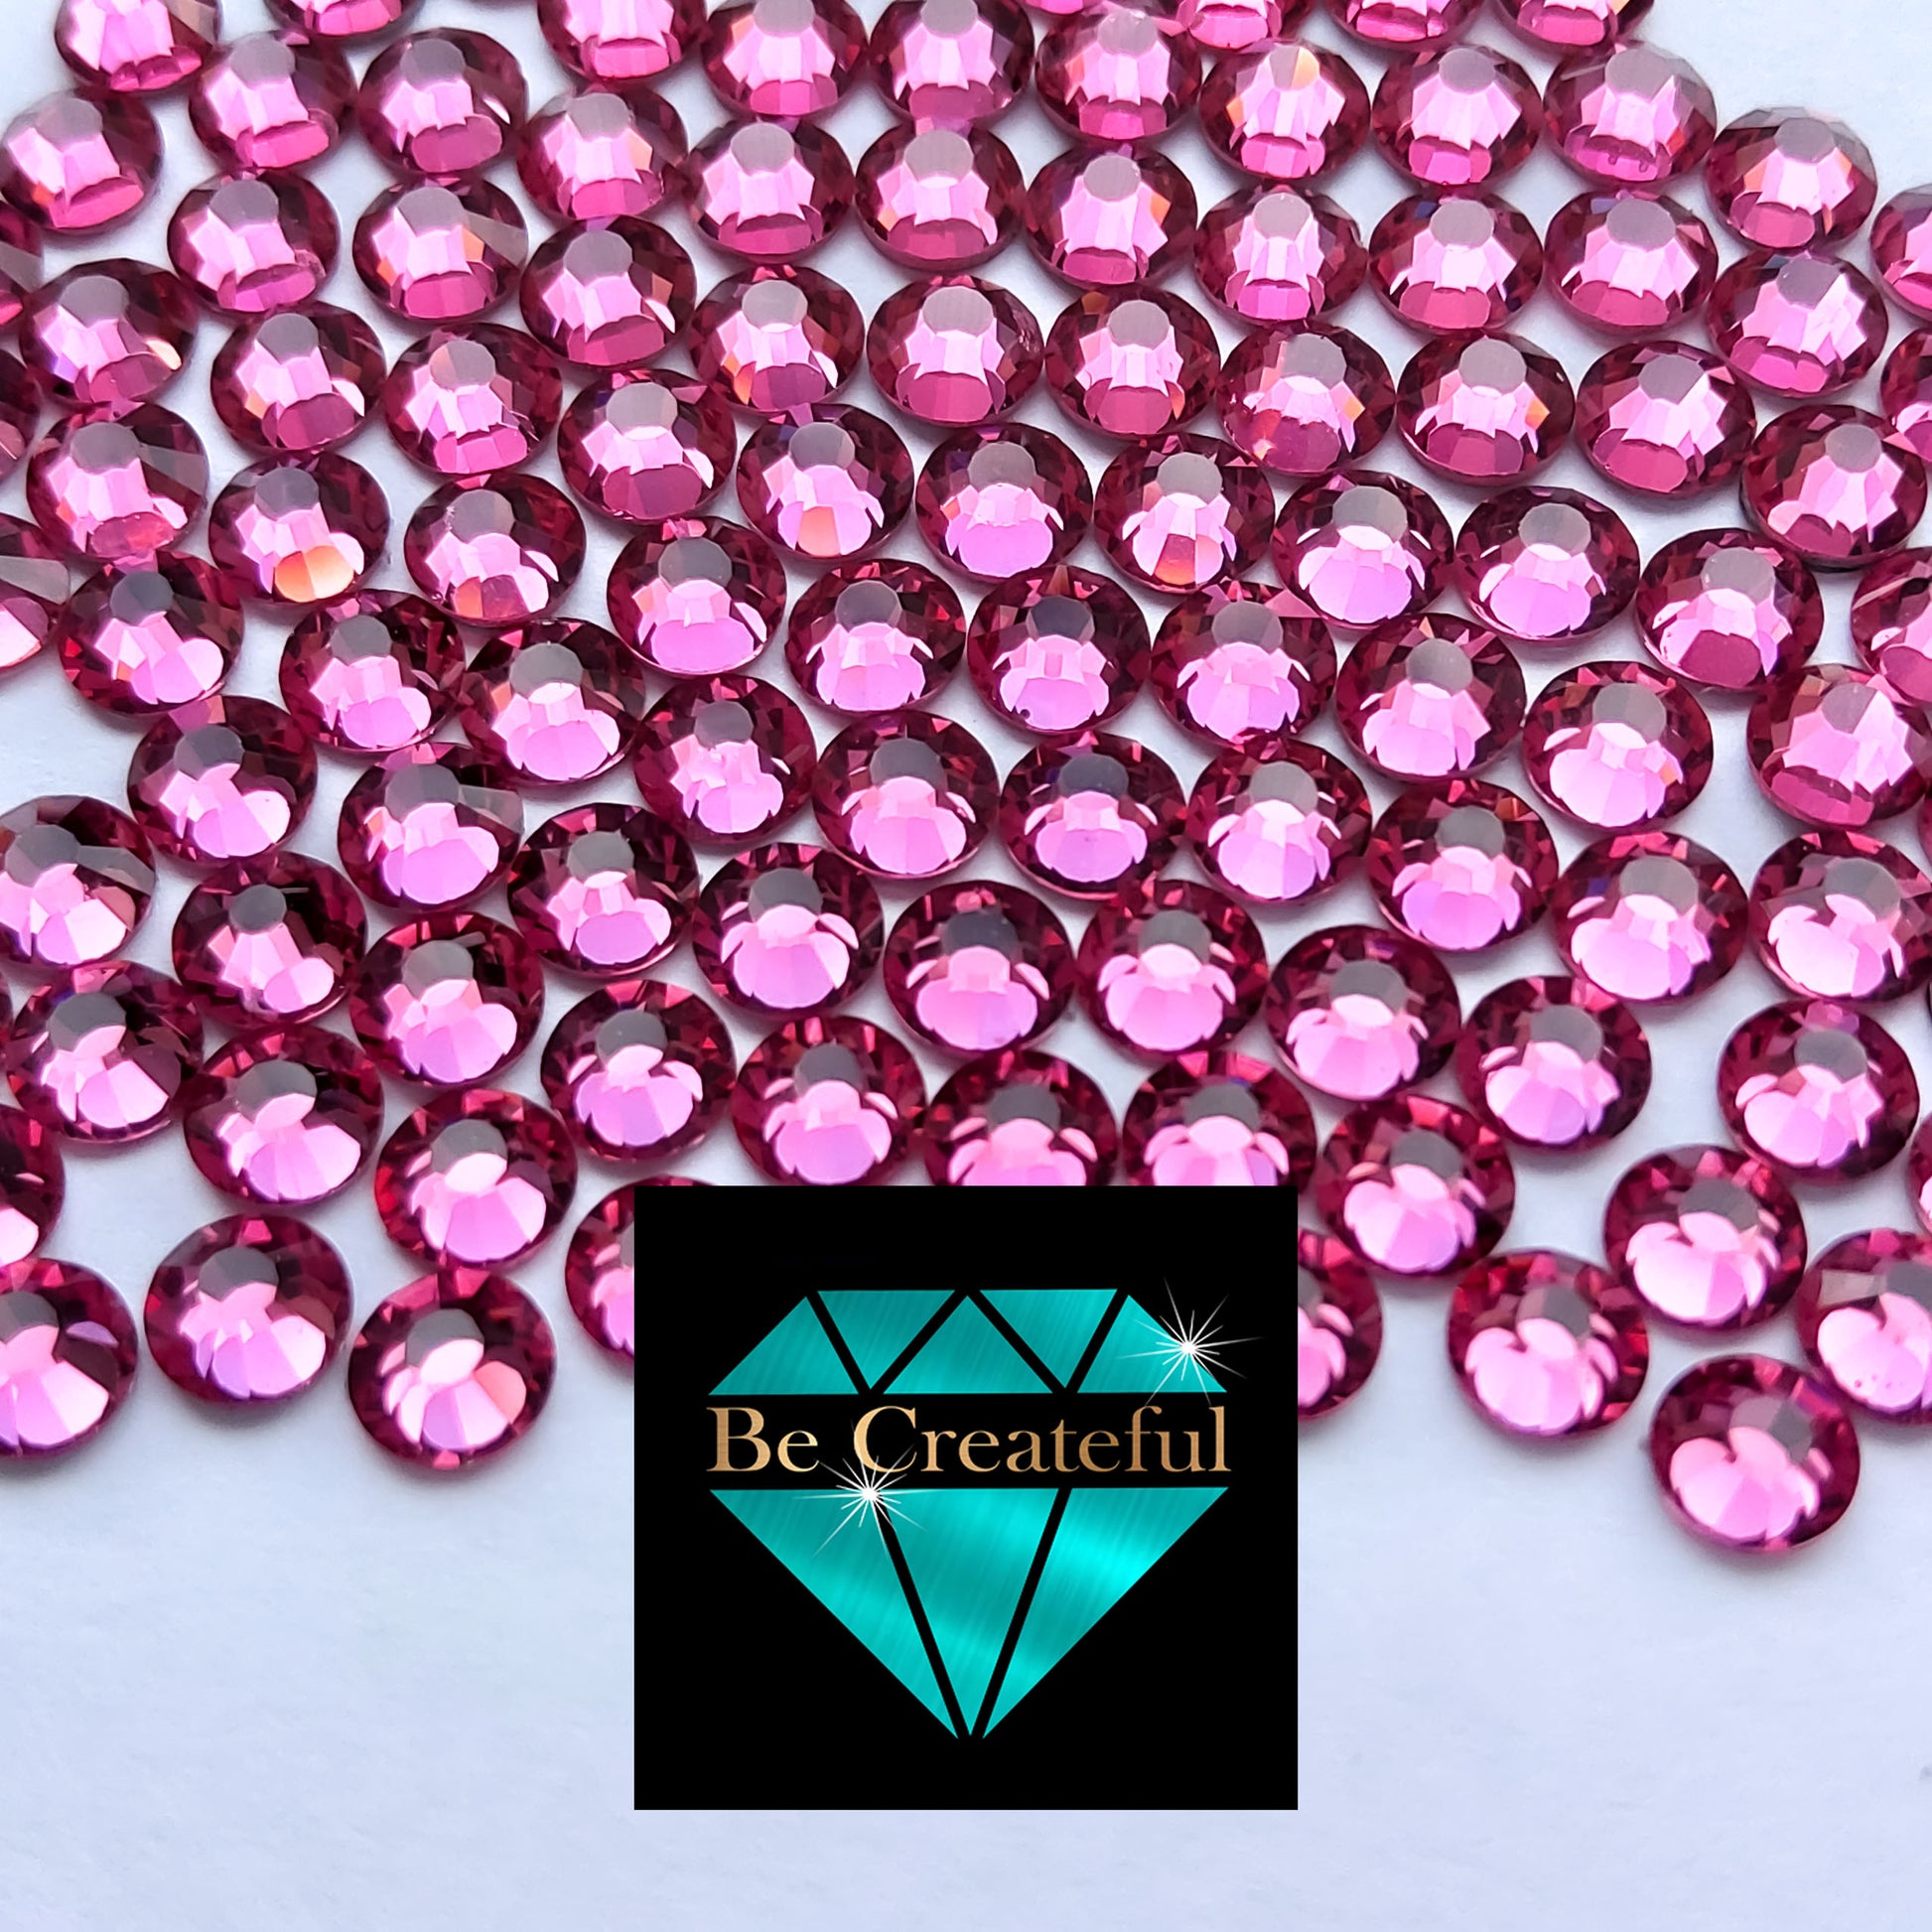 Be Createful LUXE® Rose Pink Hotfix Rhinestones are high-quality 14-16 facet glass Rhinestone that provides intense sparkle and refraction. LUXE® Hotfix rhinestones are known for their brilliant sparkle, made possible with their precision-cut facets. LUXE® Rhinestones provide high-end sparkle without the high-end prices.